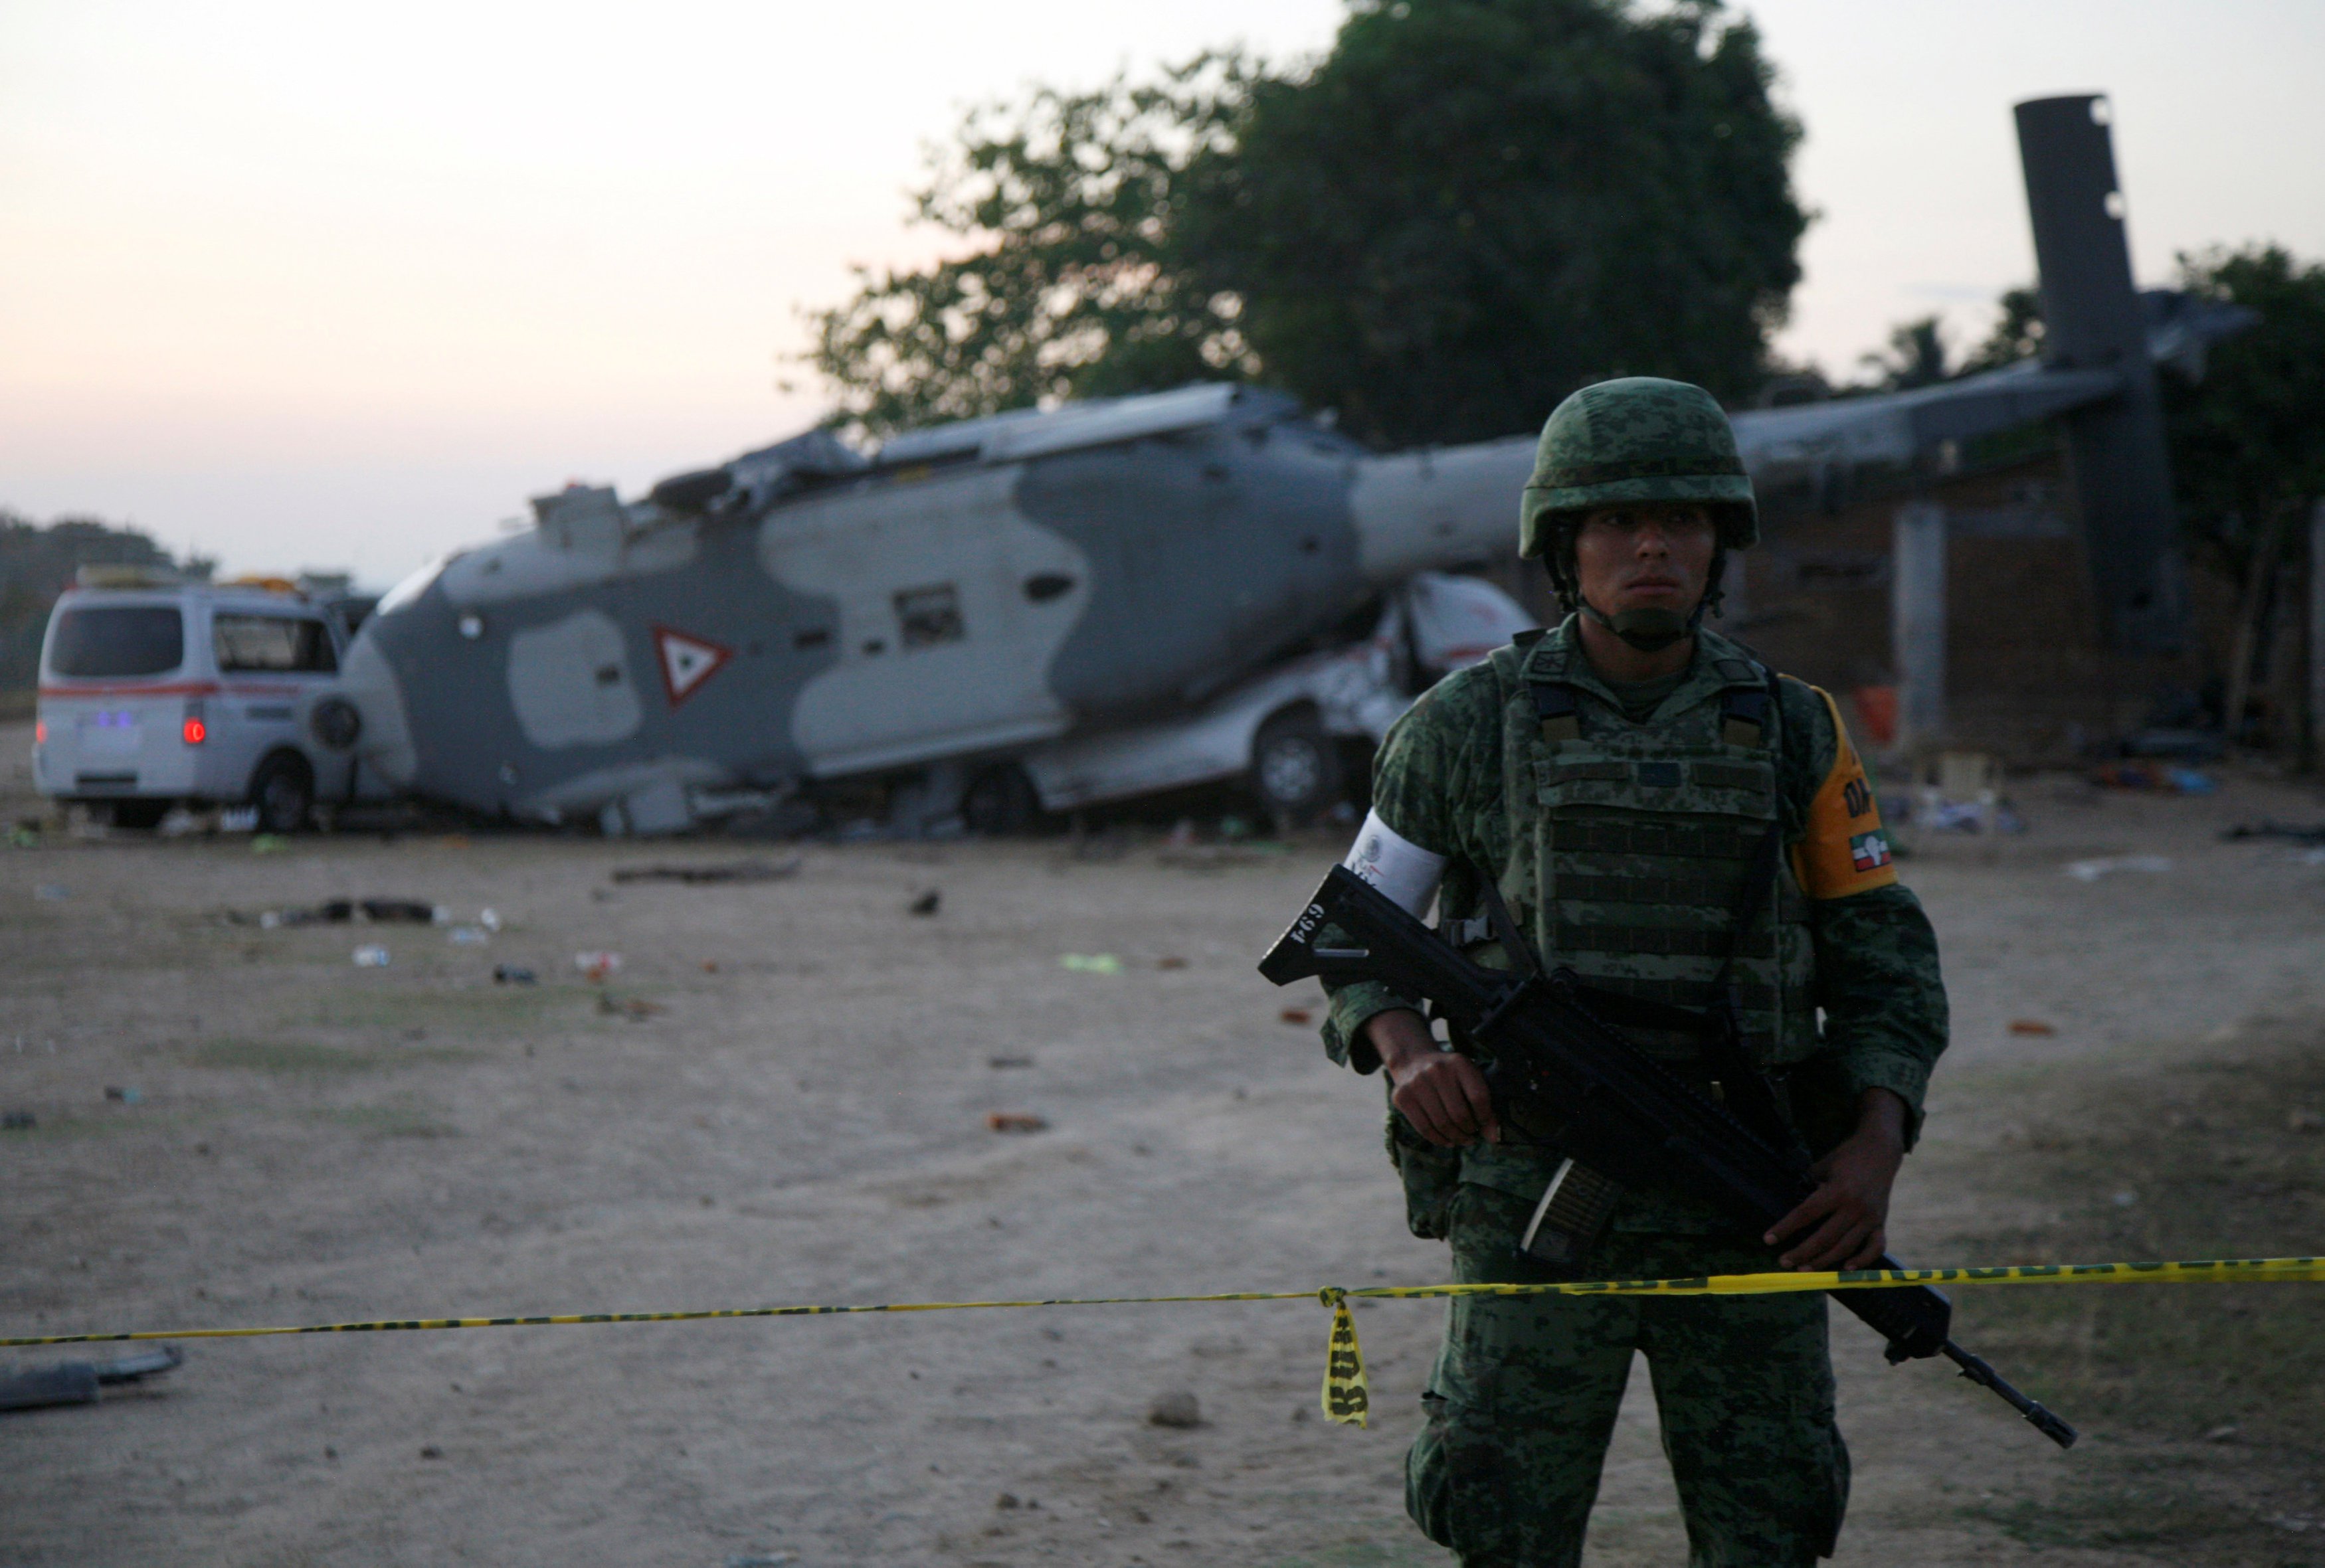 A soldier stands guard next to a military helicopter, carrying Mexico